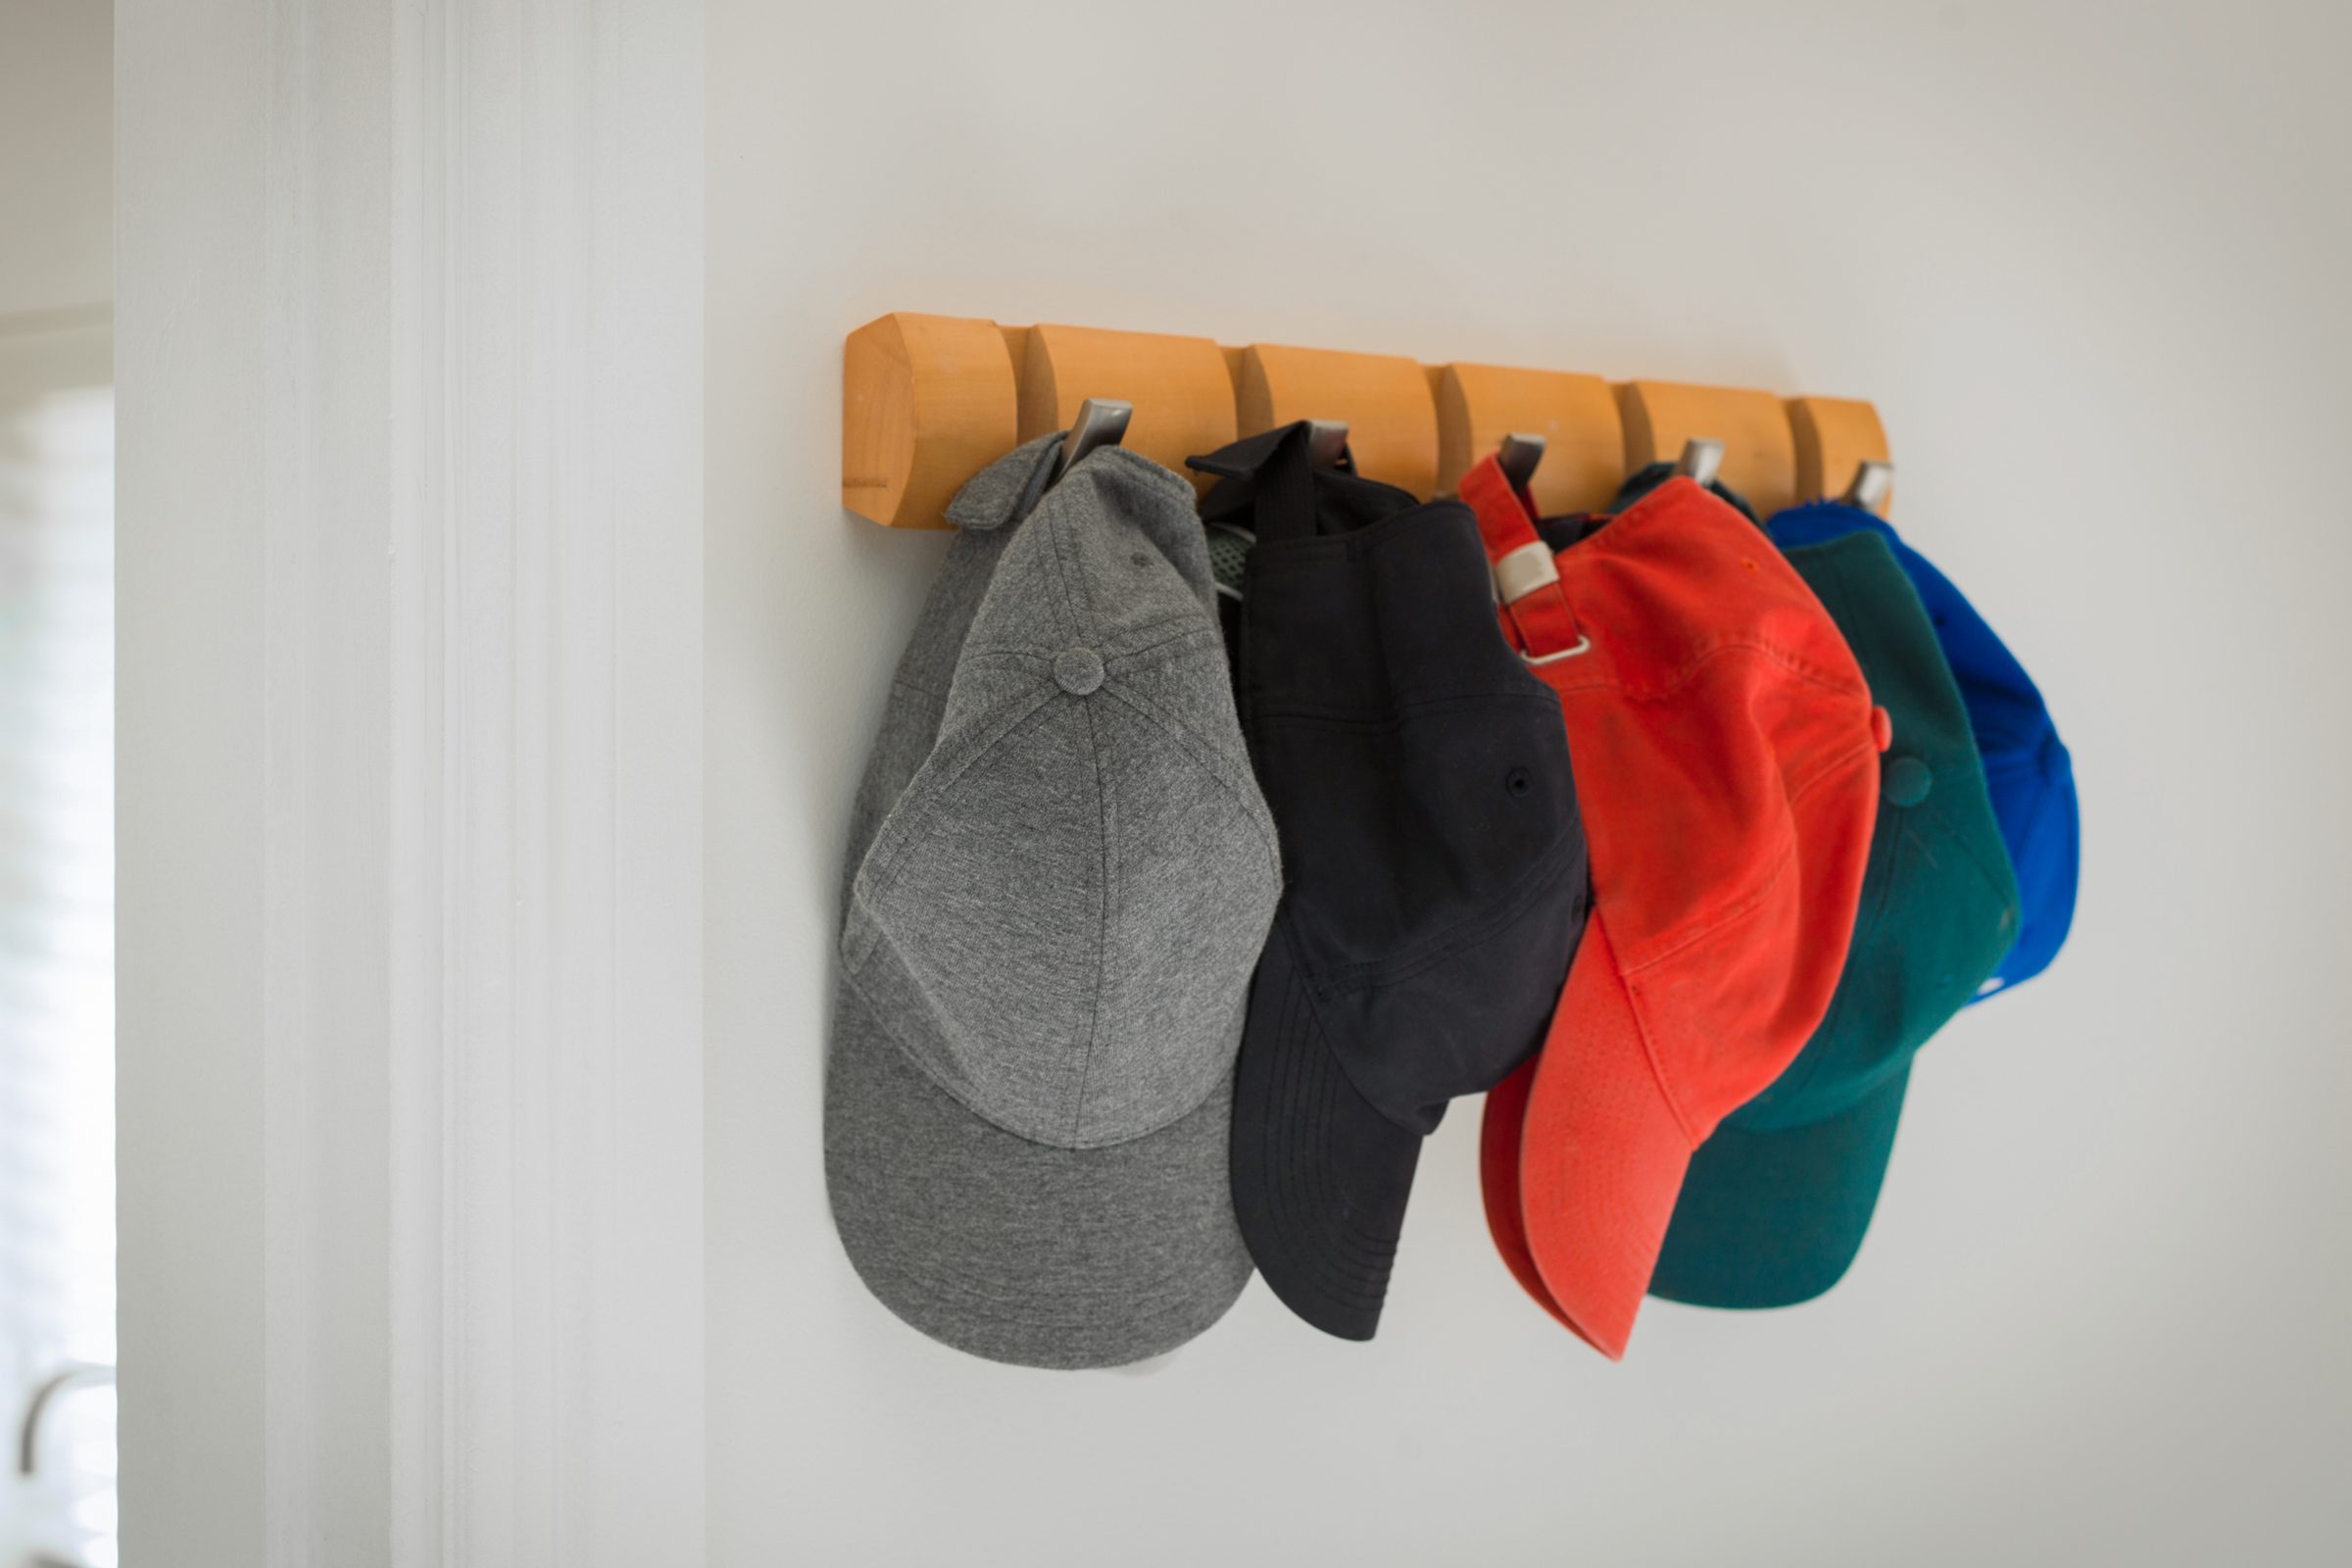 Hykler Hyret mastermind How to Wash a Hat — How to Wash a Baseball Cap Without Ruining It